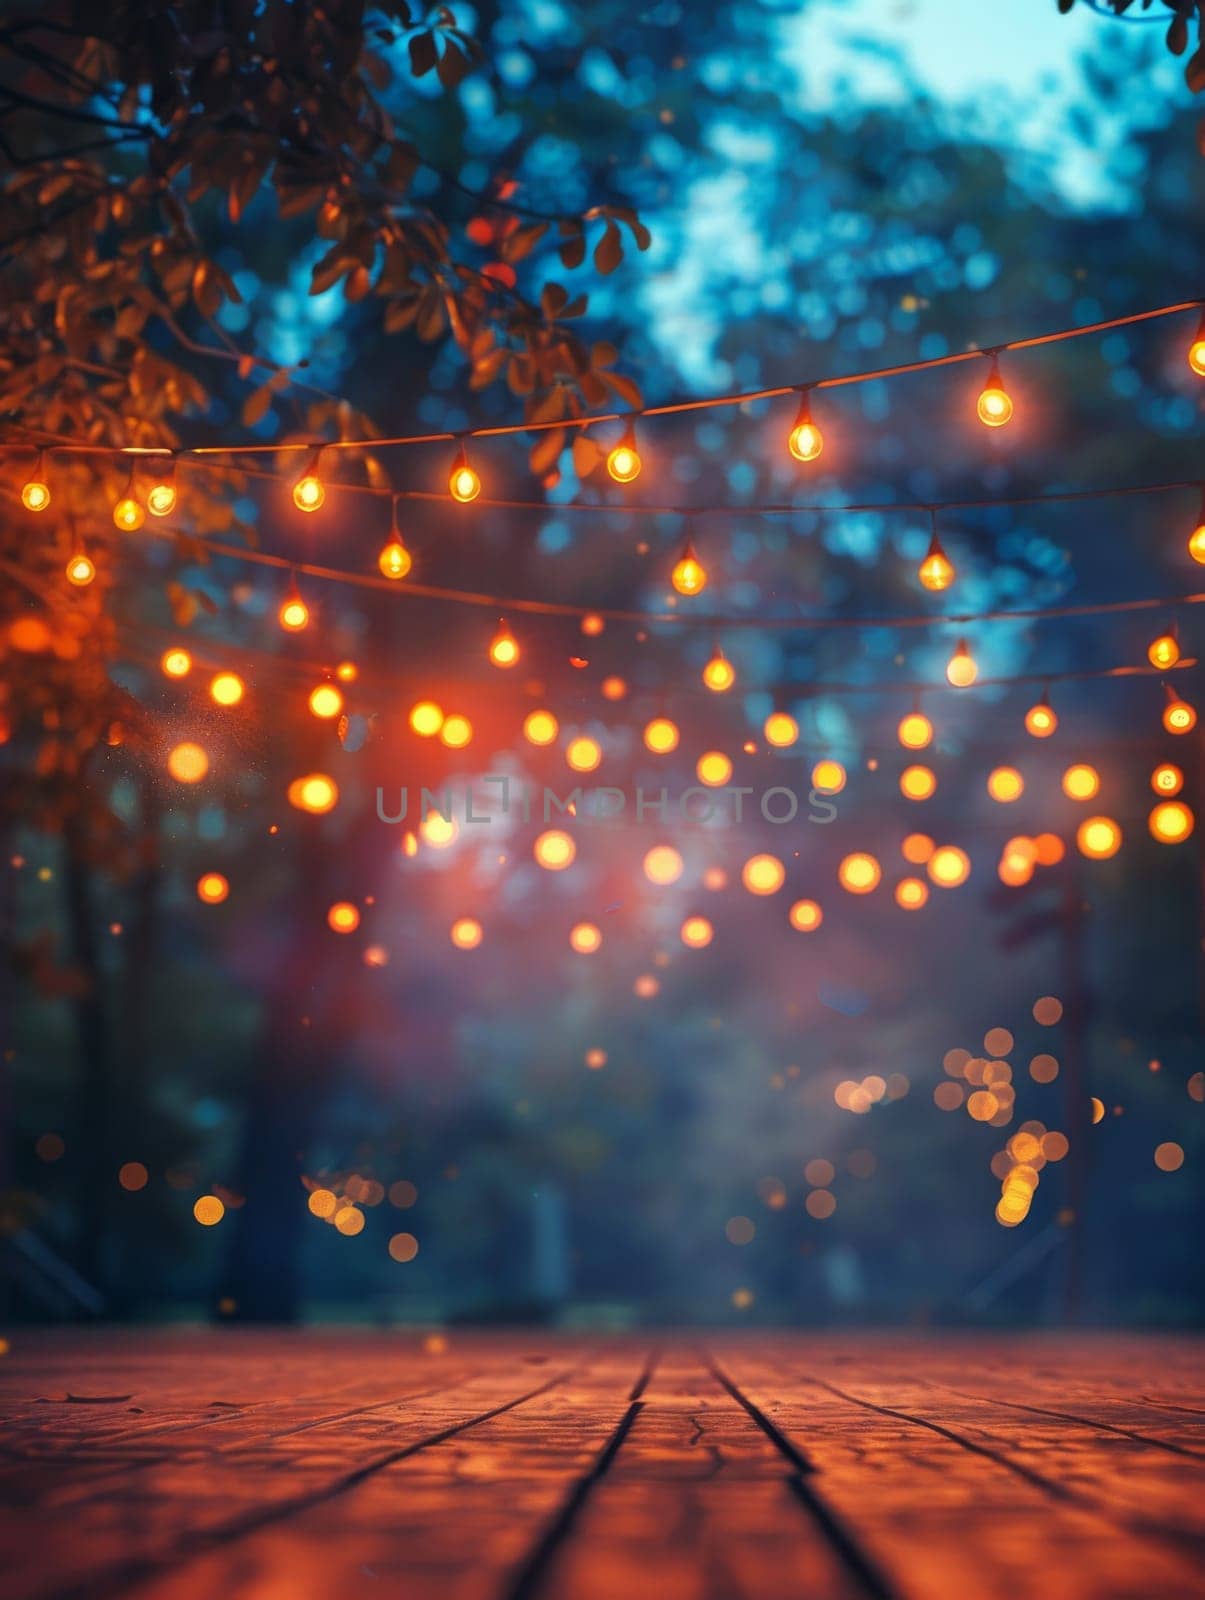 A forest scene with lights hanging from the trees. The lights are orange and create a warm, cozy atmosphere